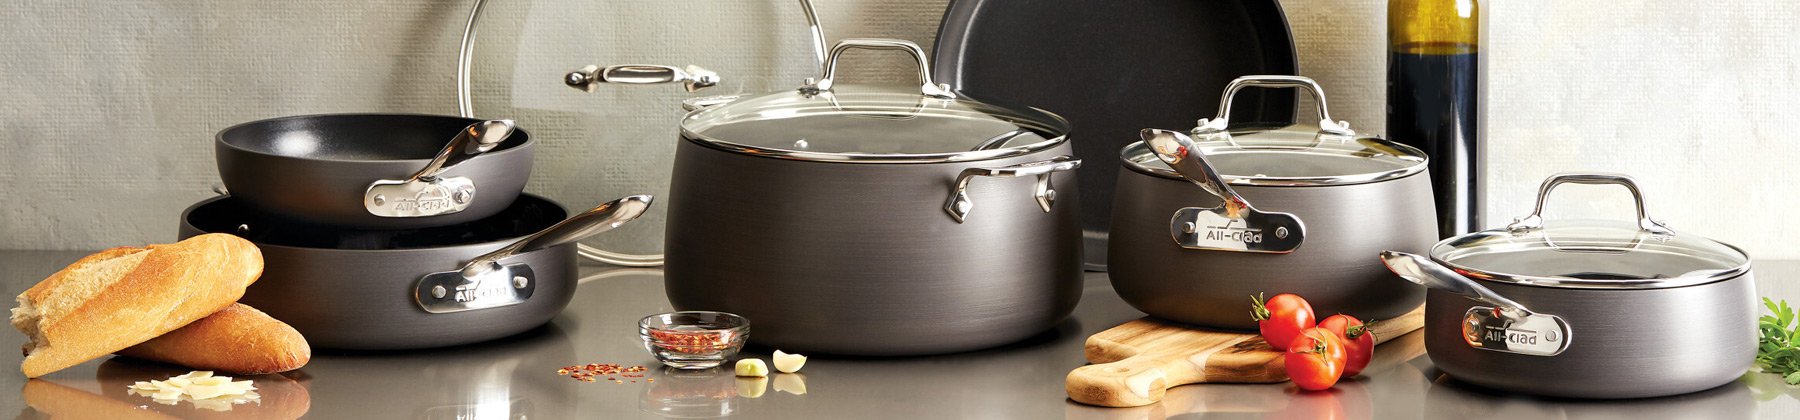 HA1 Cookware & Non-Stick Cookware Collections